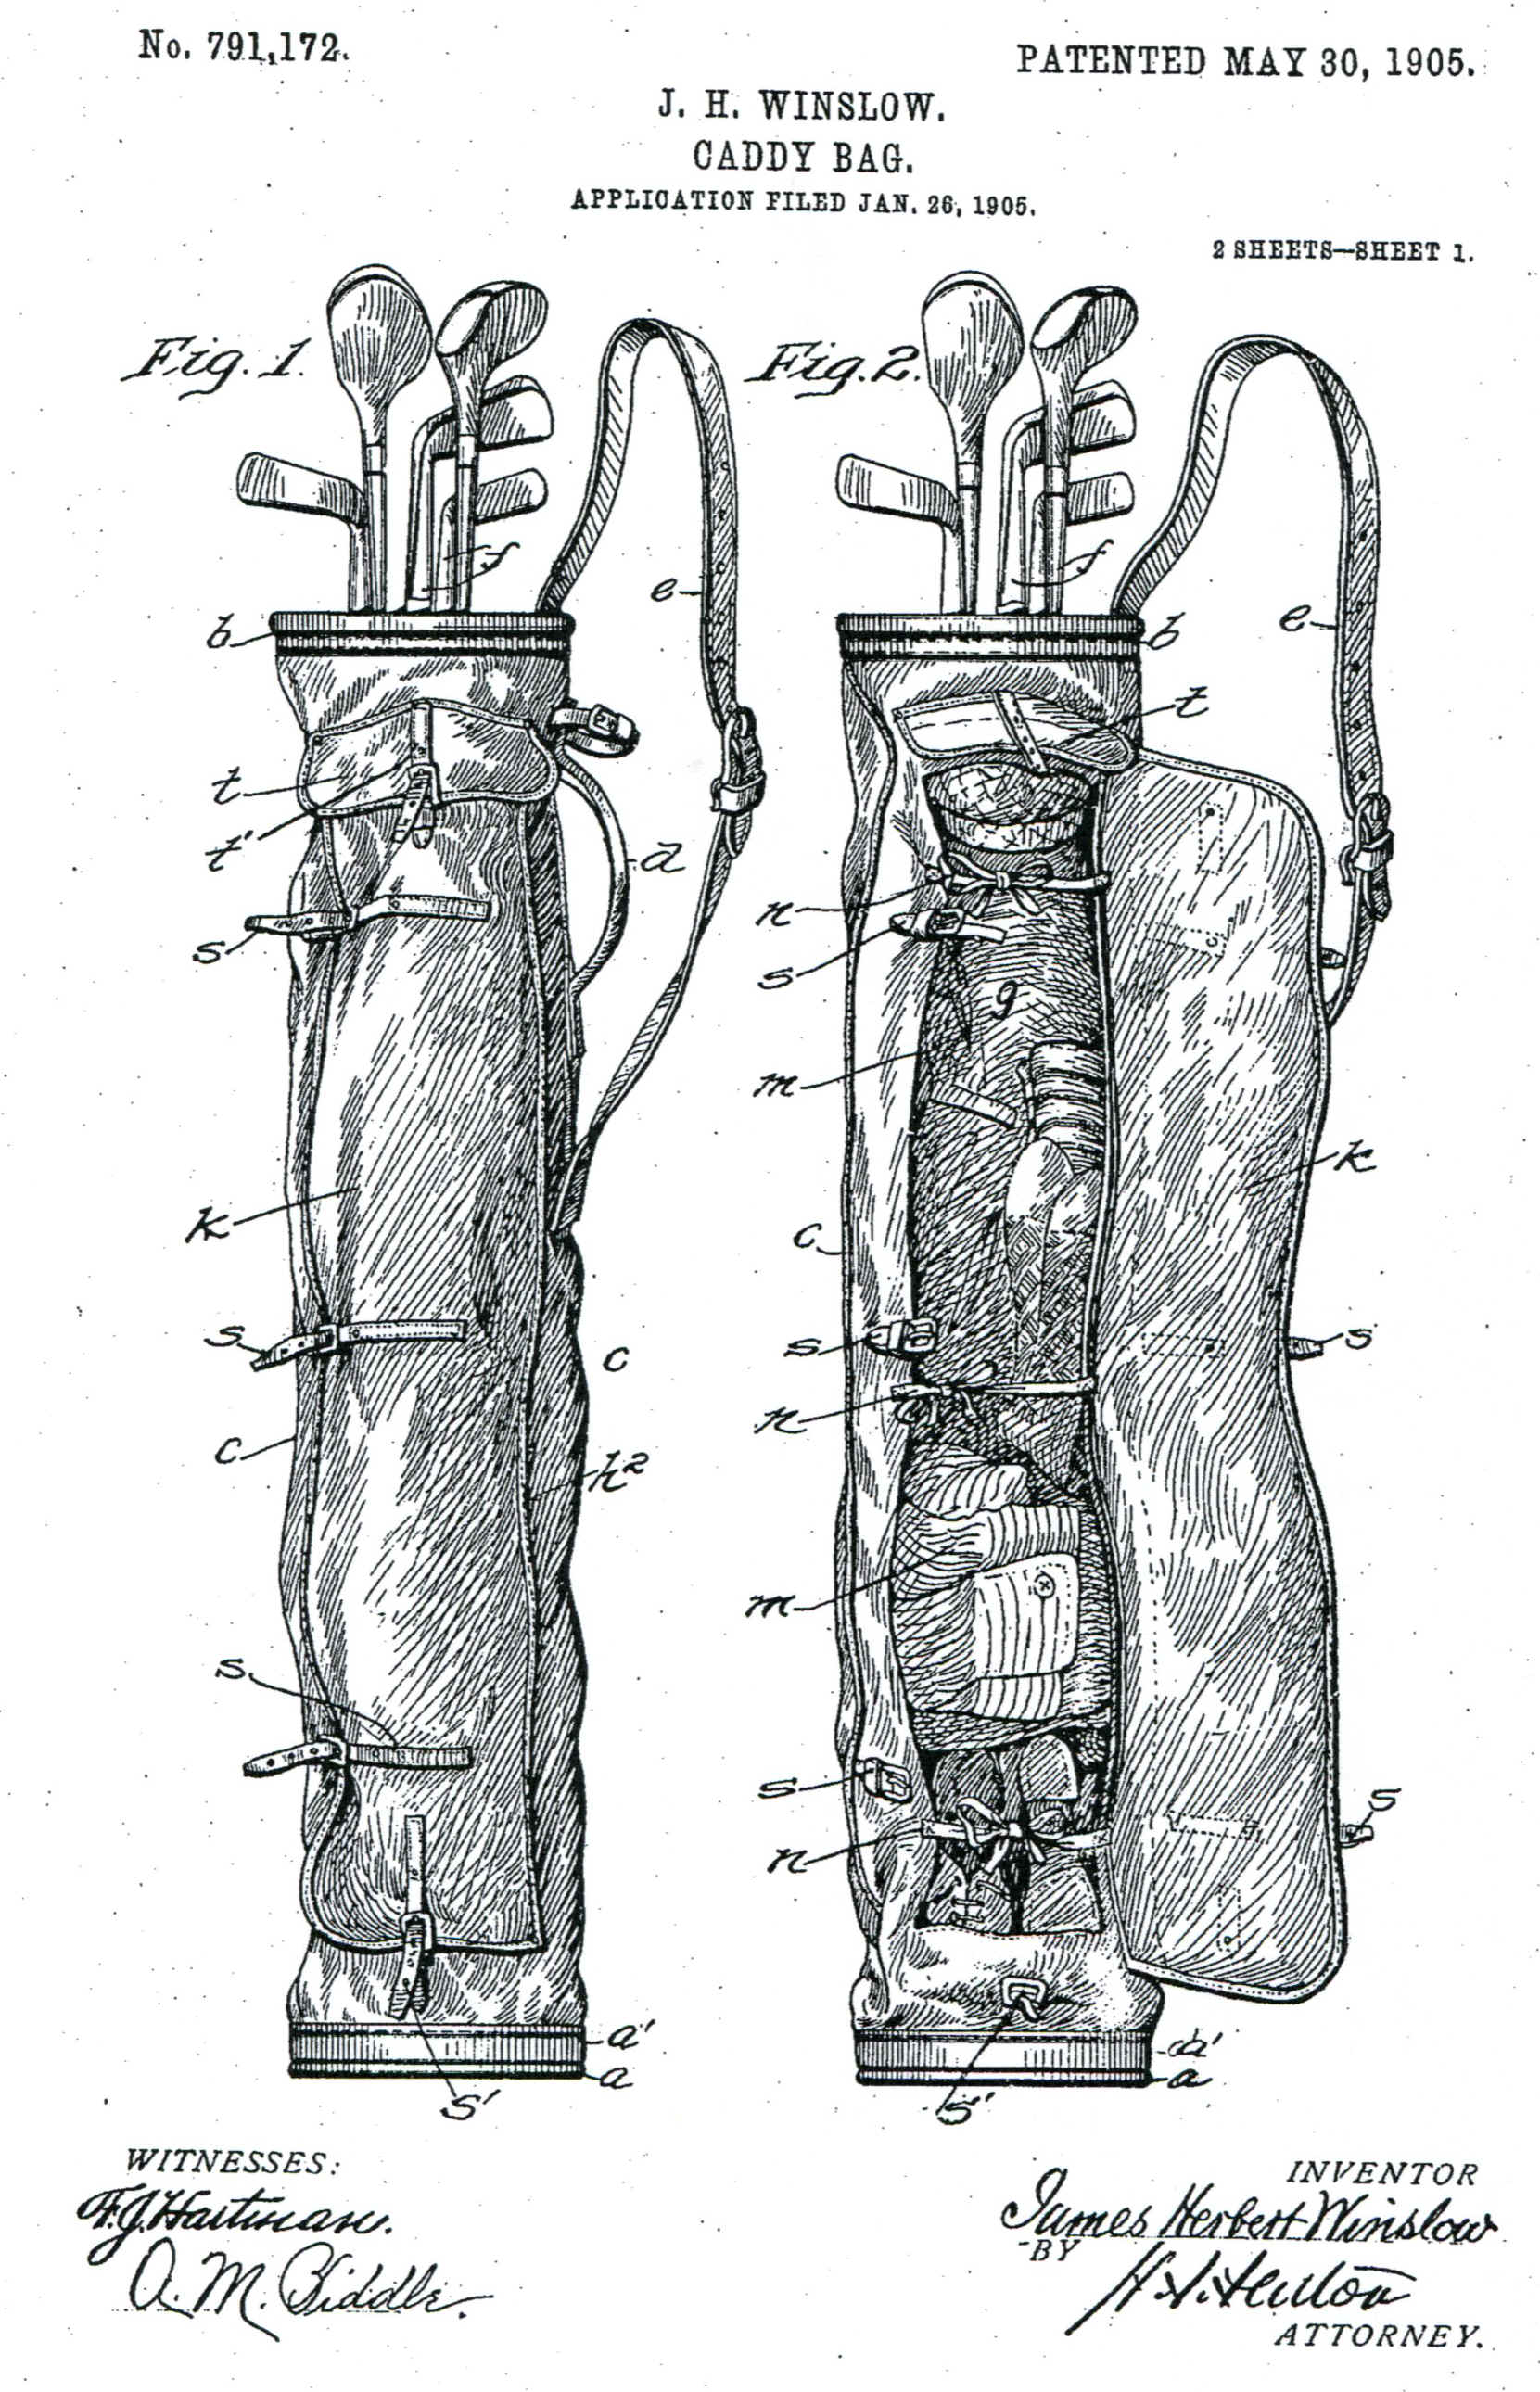 The patent drawing for JH Winslow's 1906 "Caddy Bag"